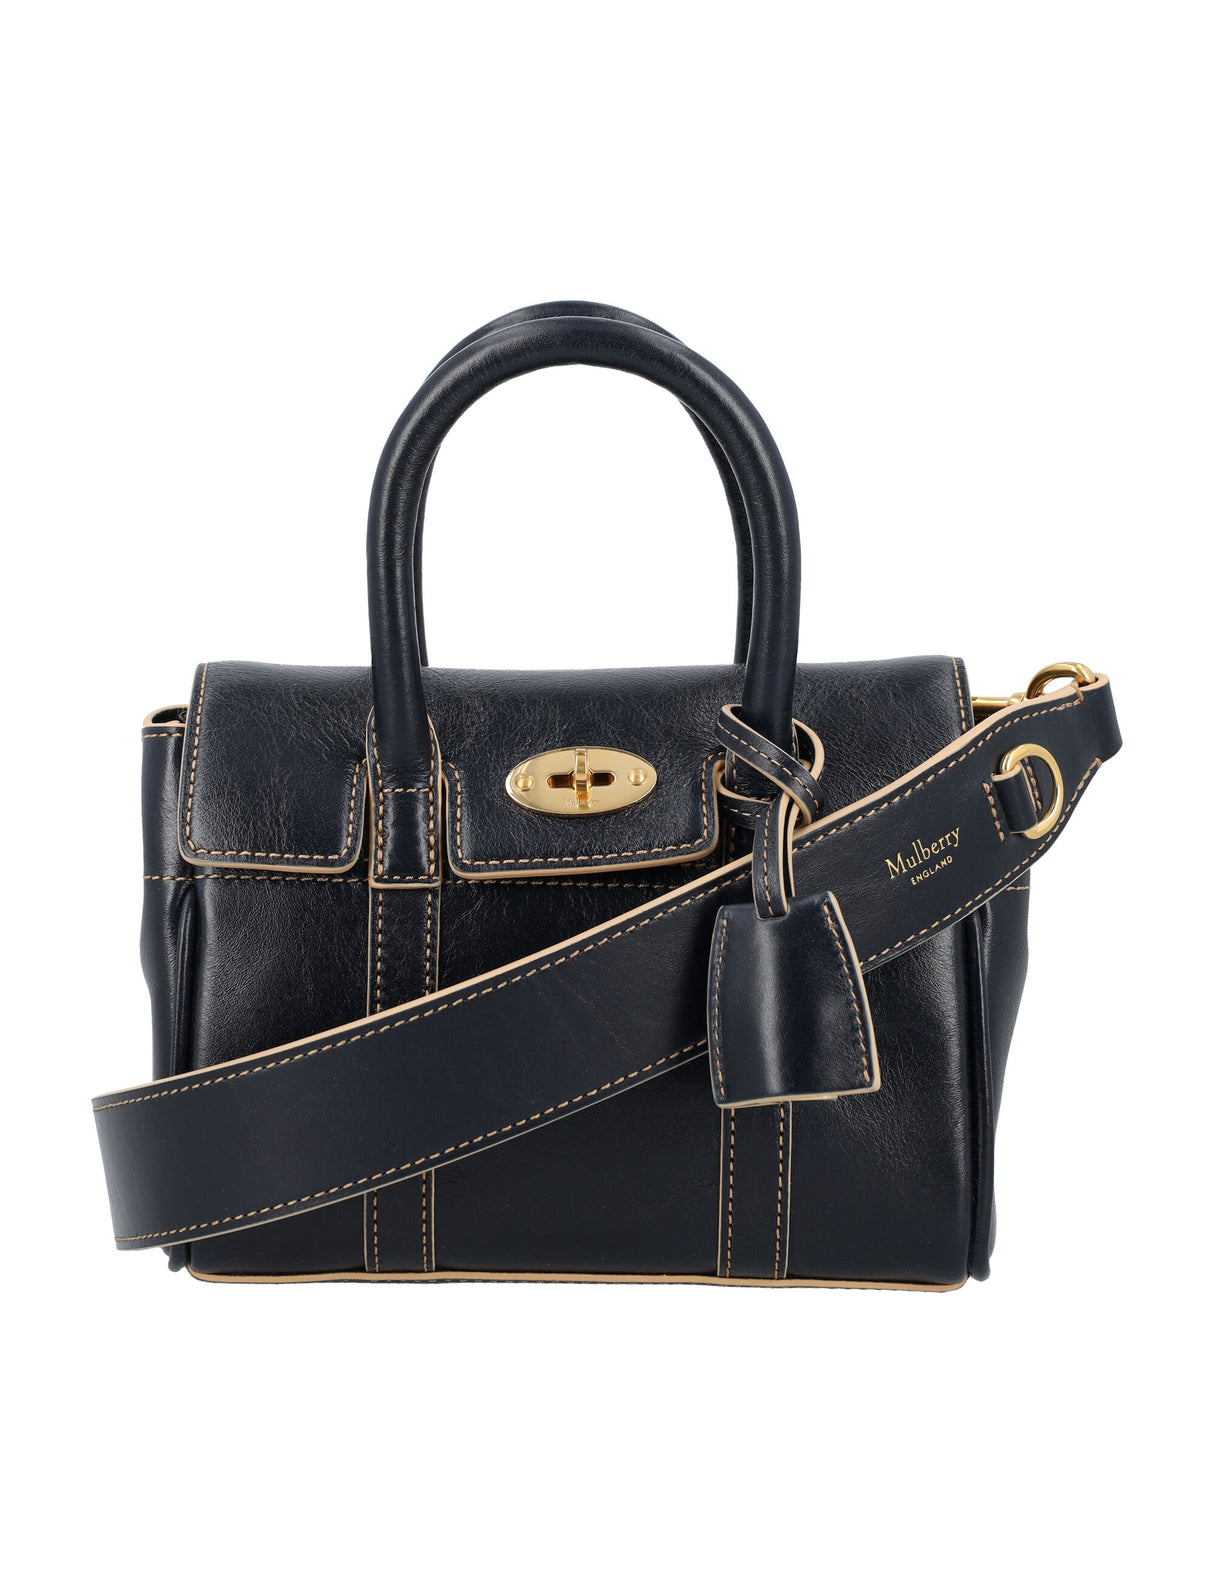 MULBERRY Mini Bayswater Navy Leather Handbag with Contrast Stitching and Soft Gold Details - 18.5x12.5x8 cm